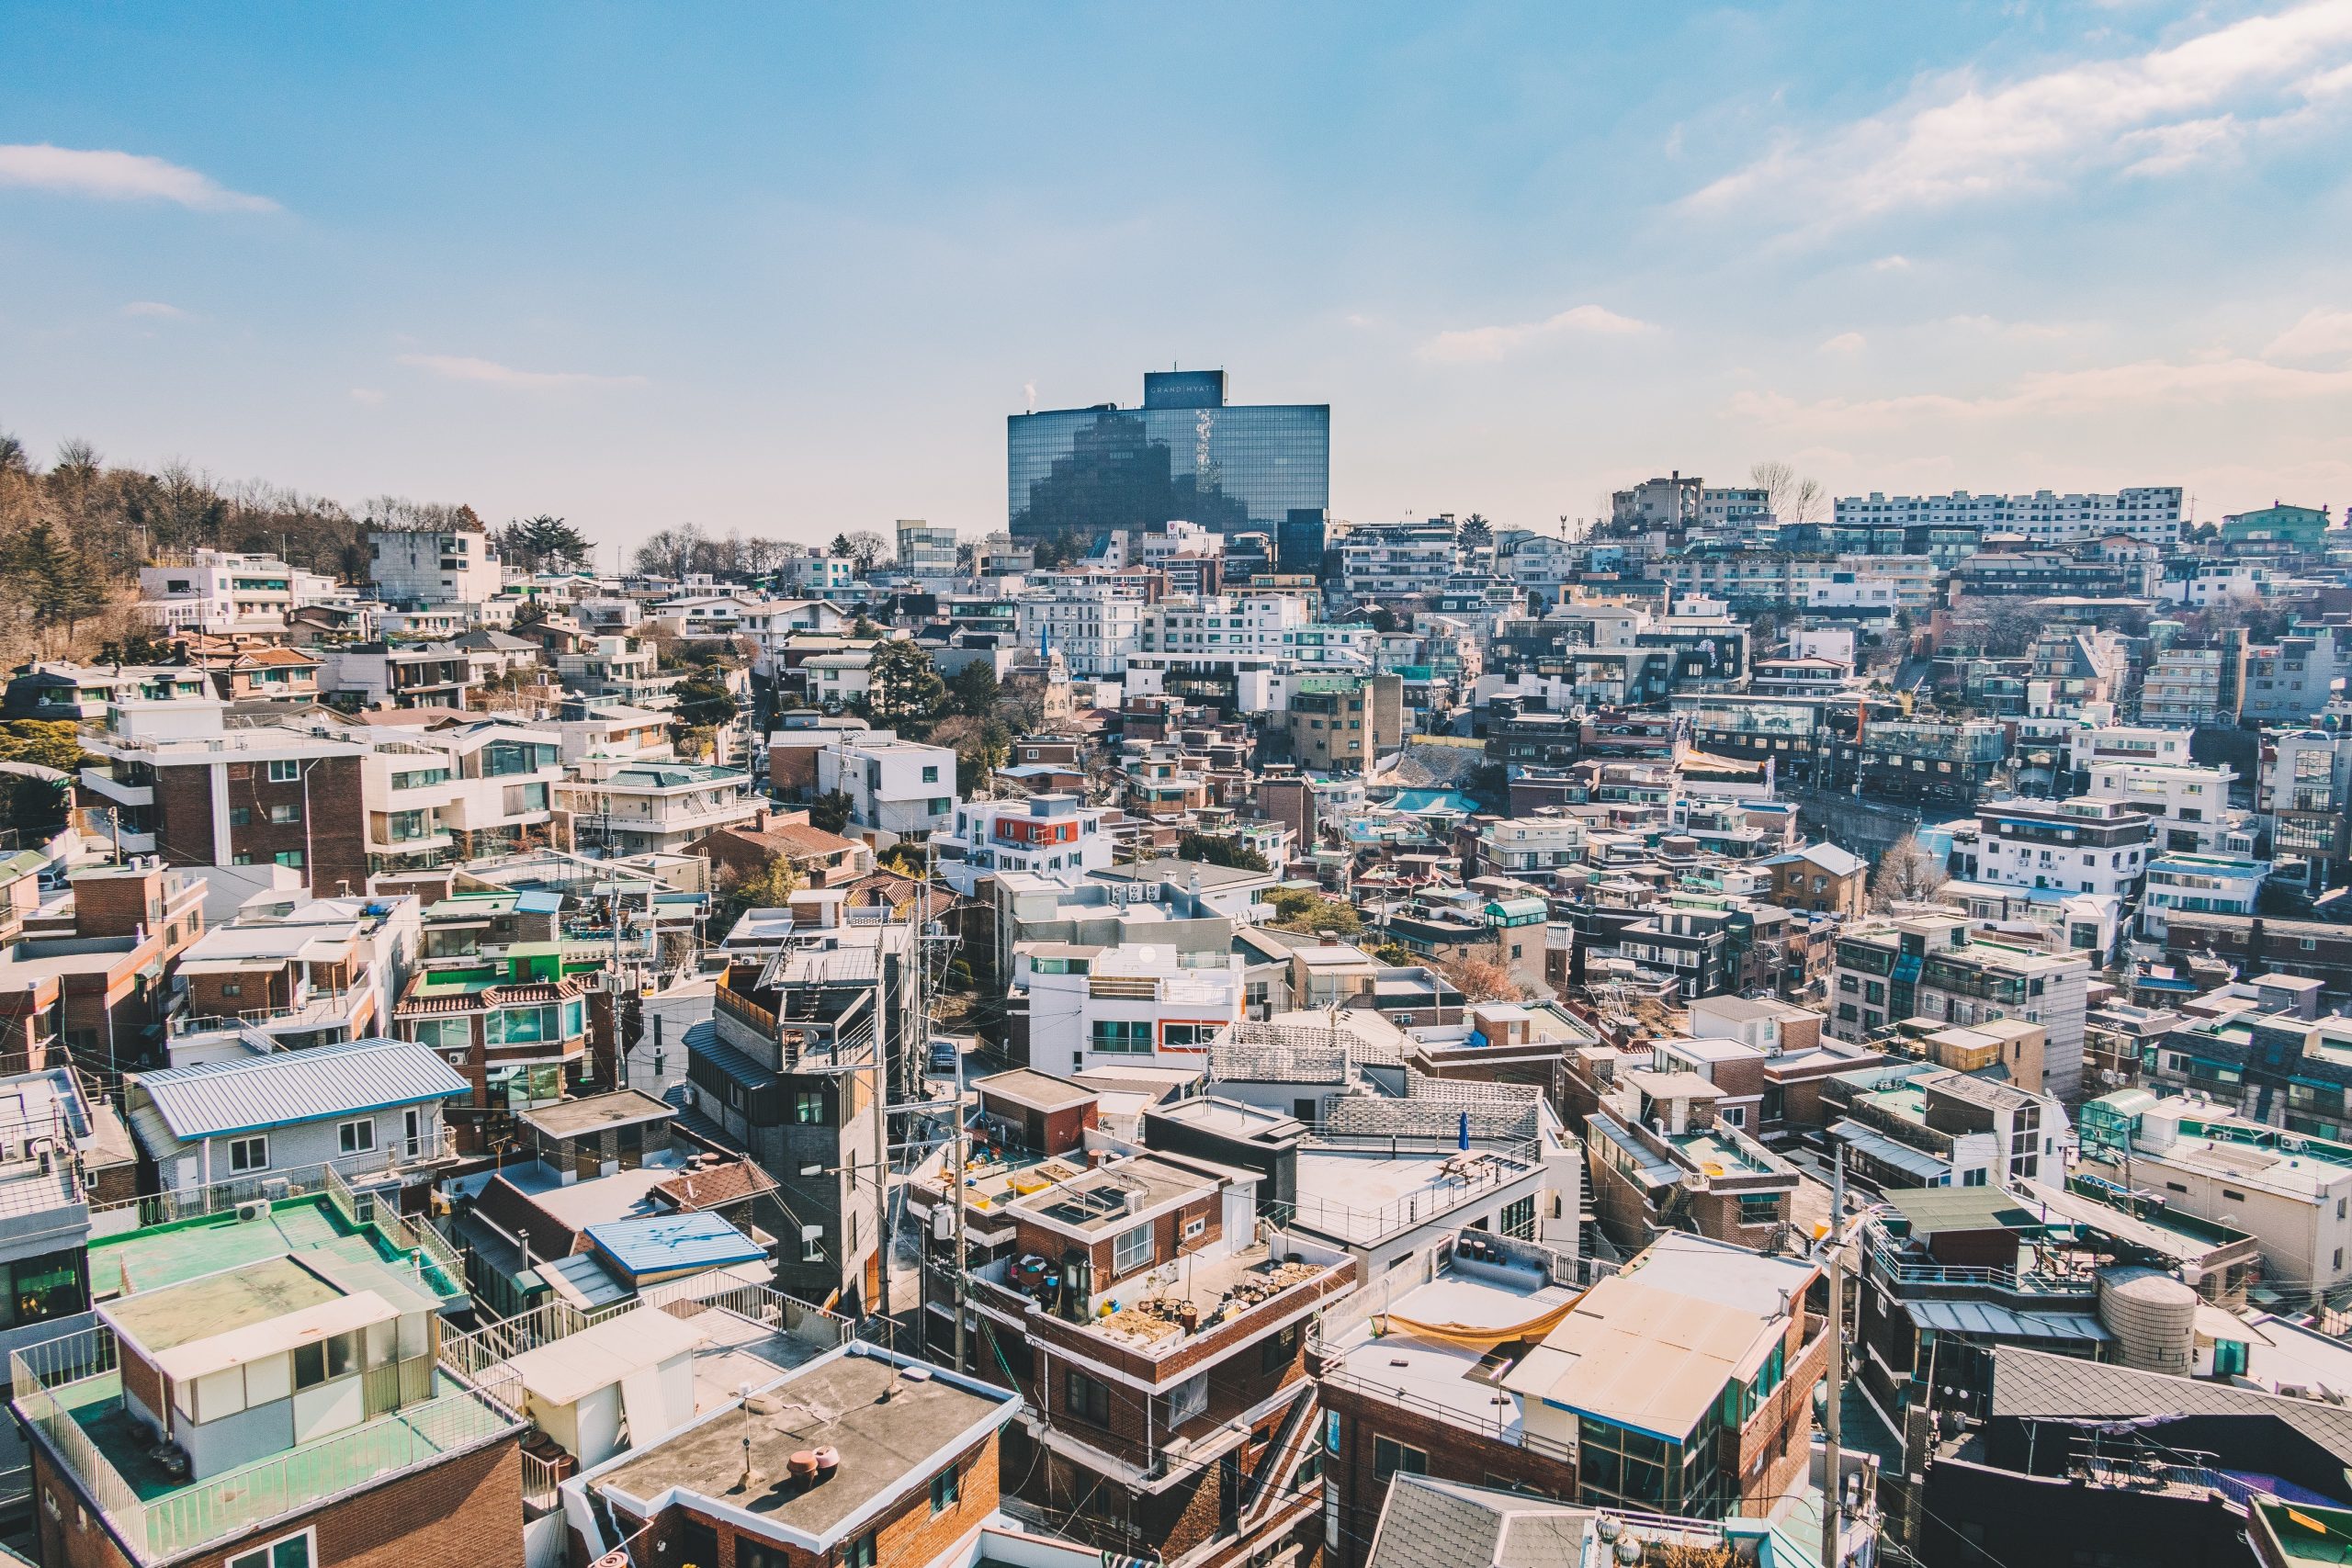 Itaewon as seen from above - a great place to stay in Seoul